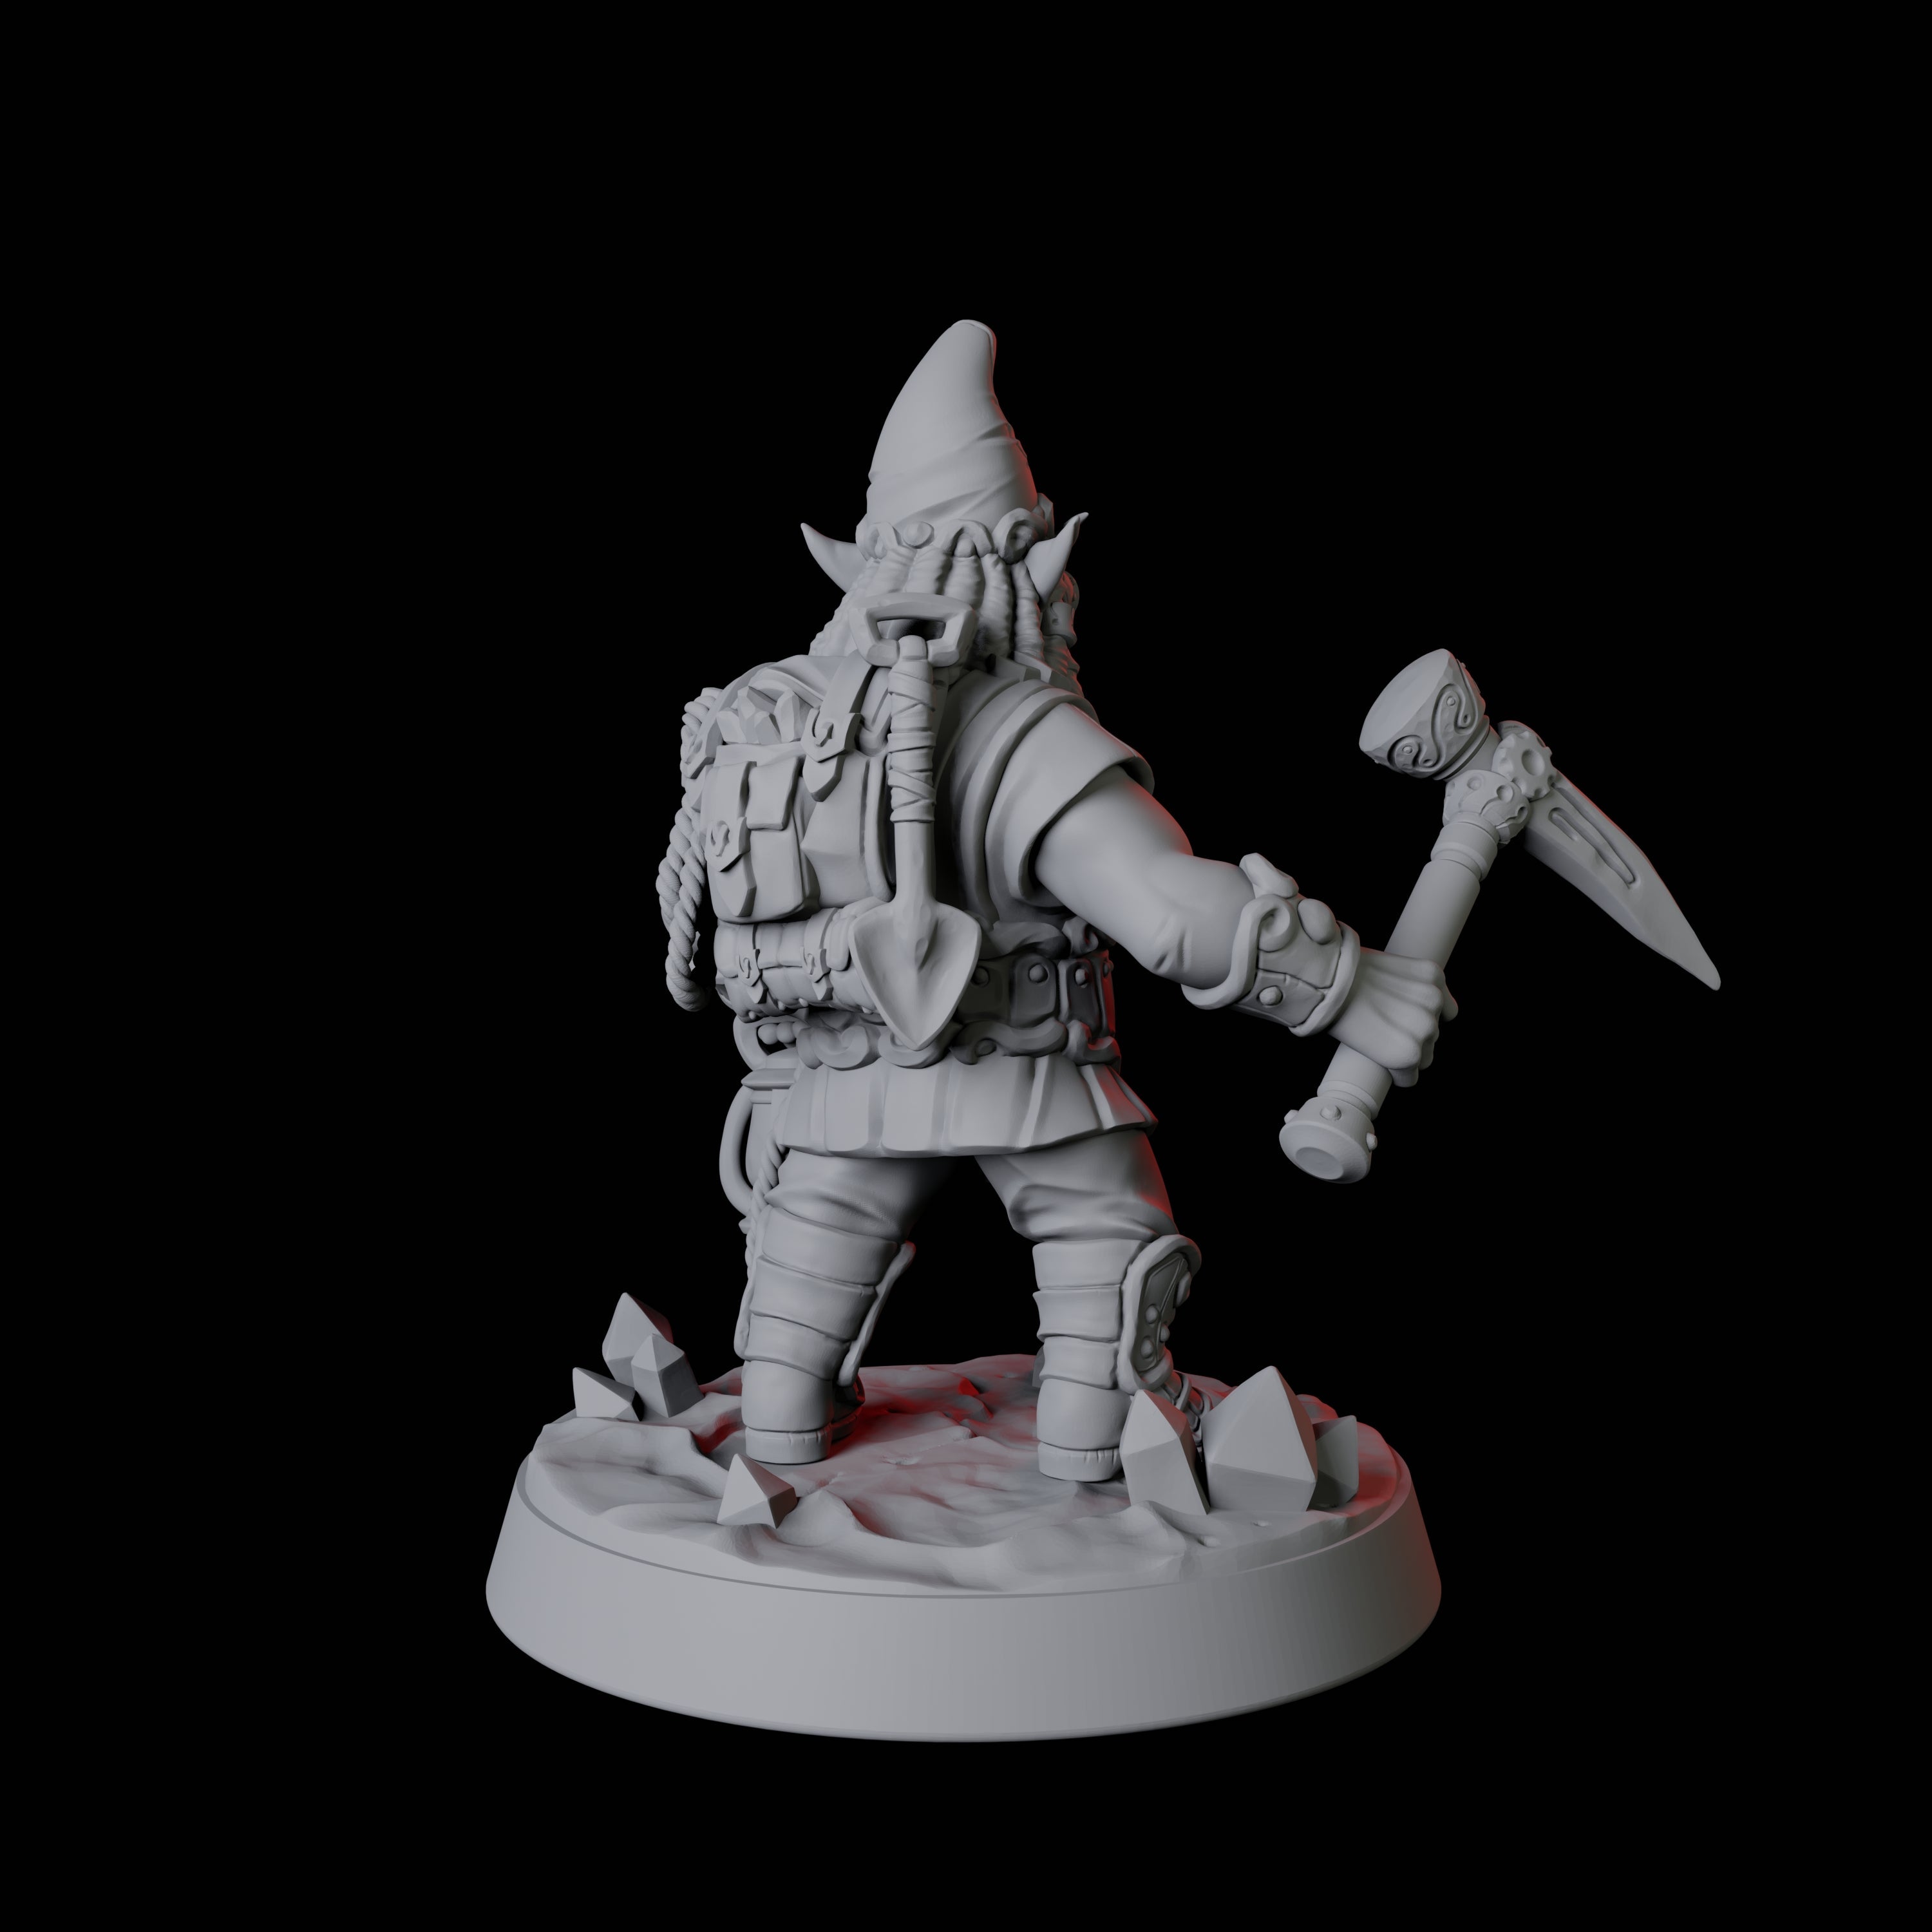 Gnome Miner A Miniature for Dungeons and Dragons, Pathfinder or other TTRPGs